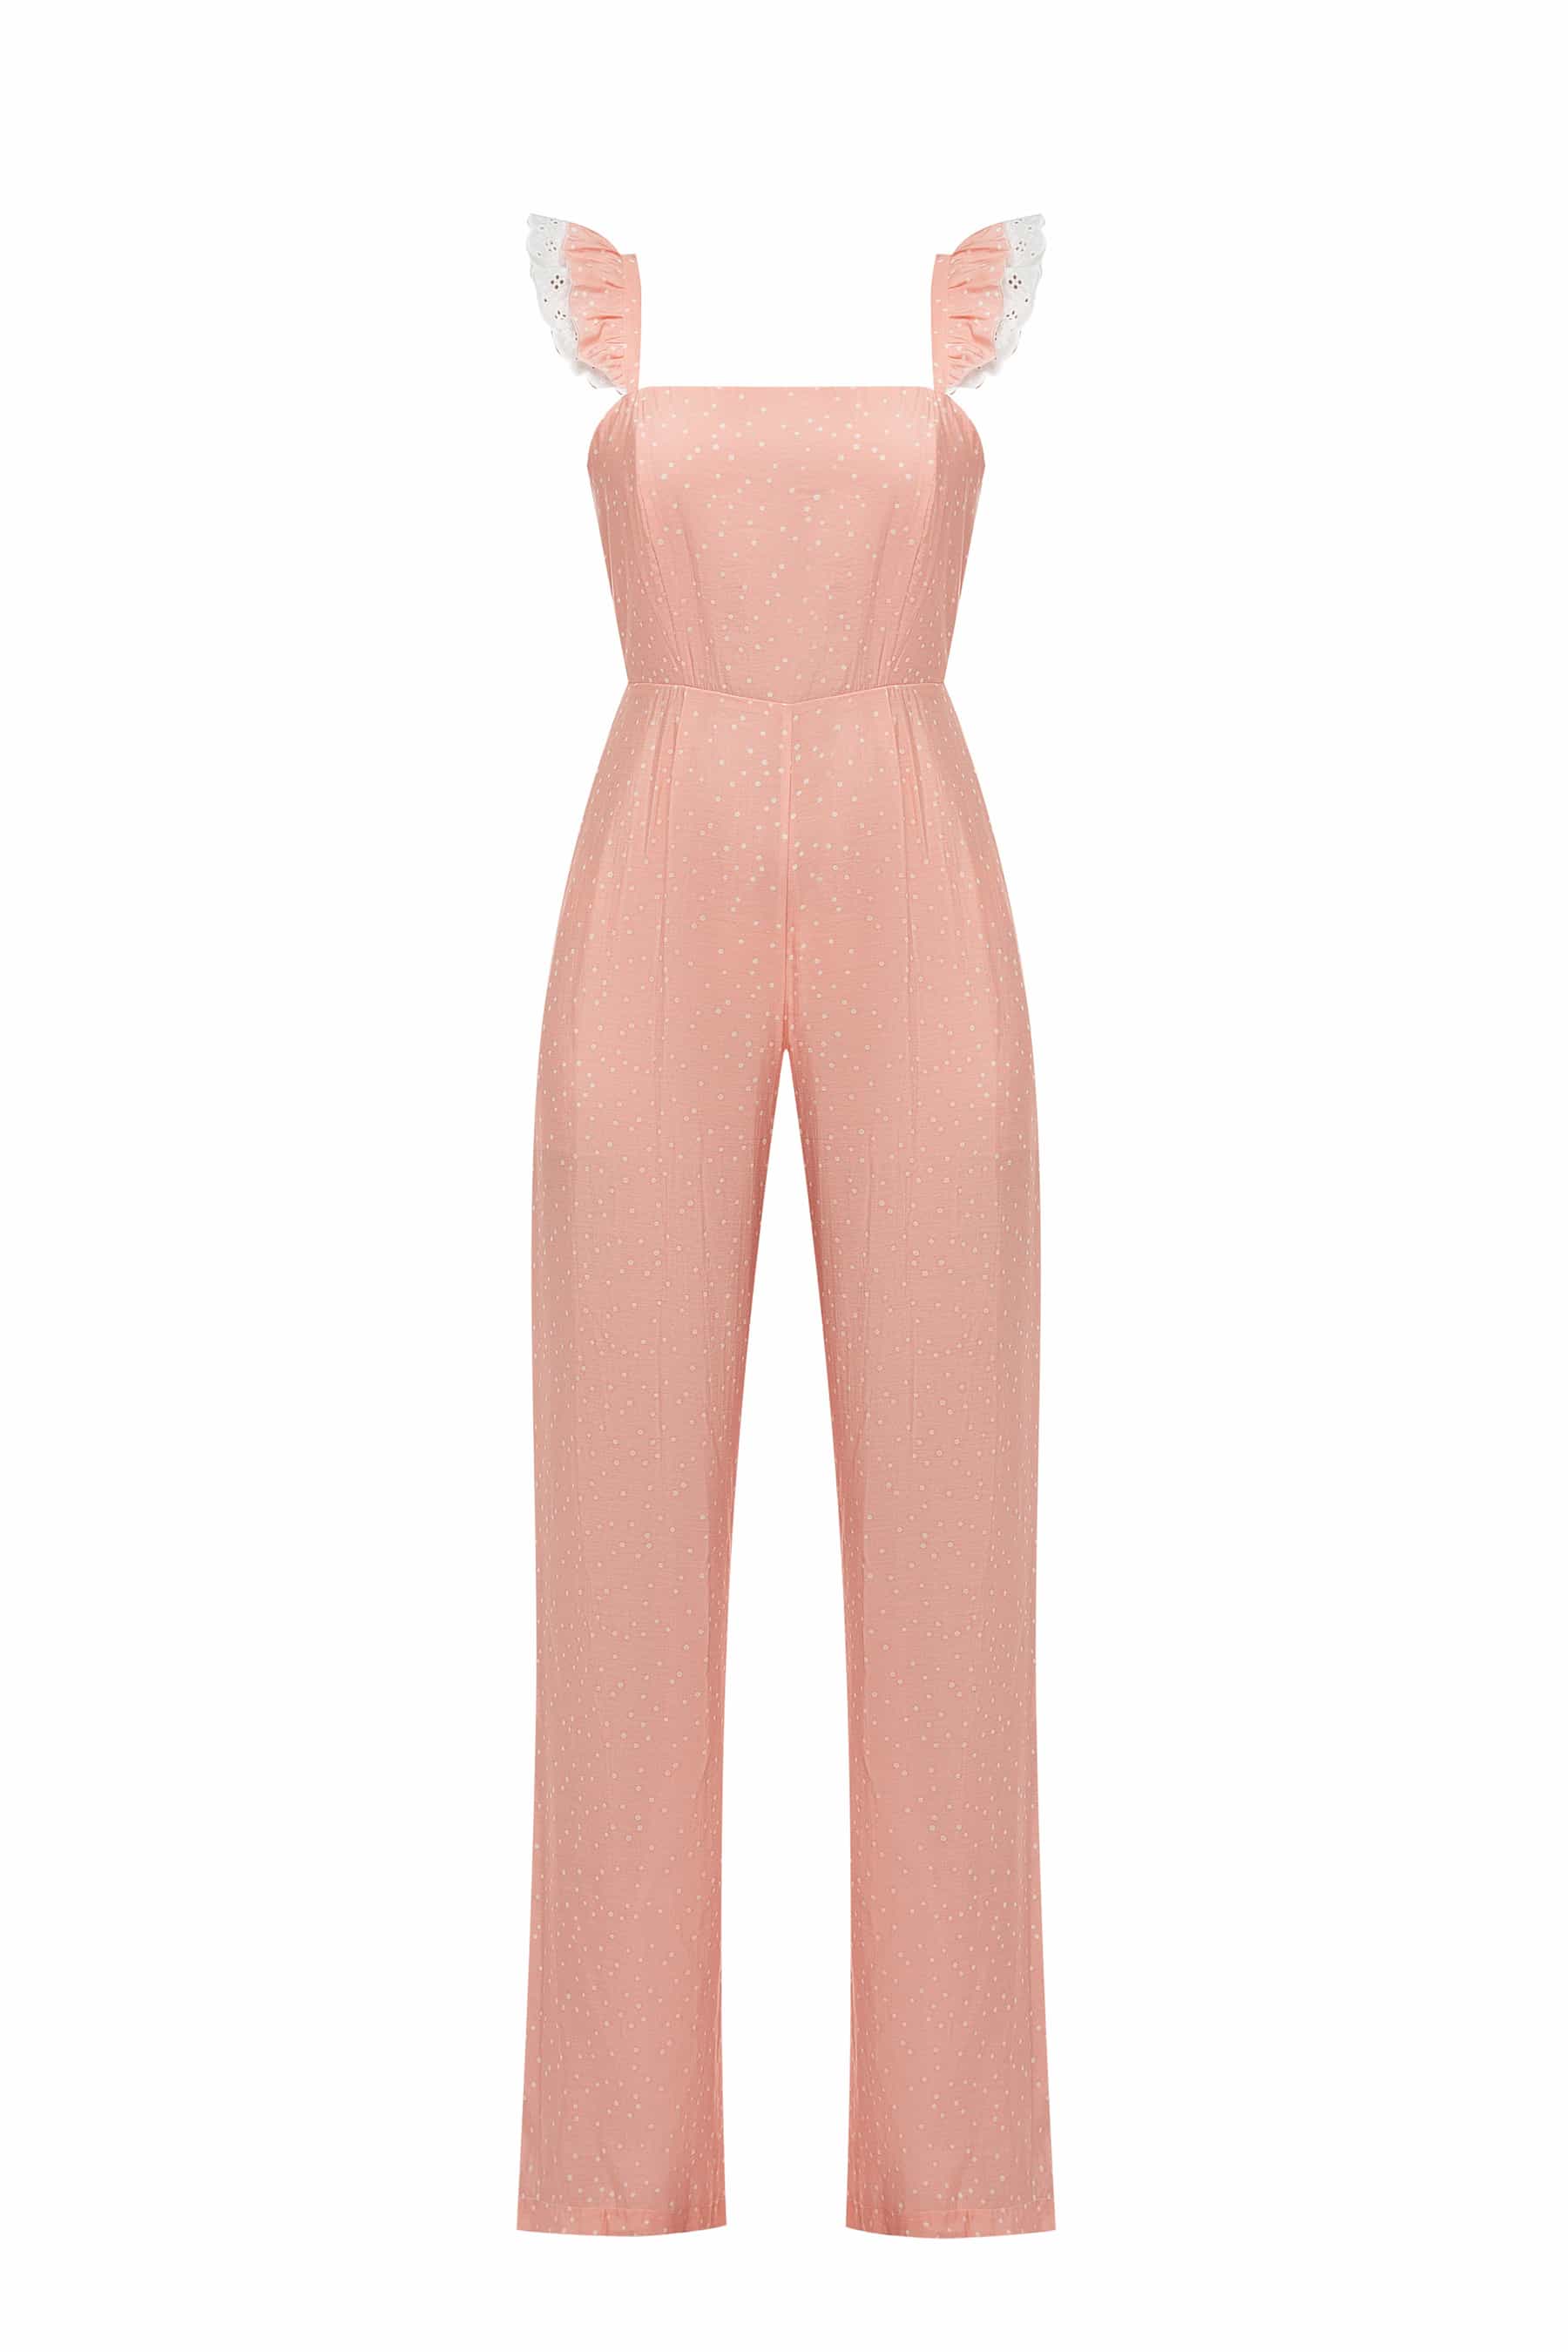 Pink jumpsuit with white polka dots with lace and a tie on the back